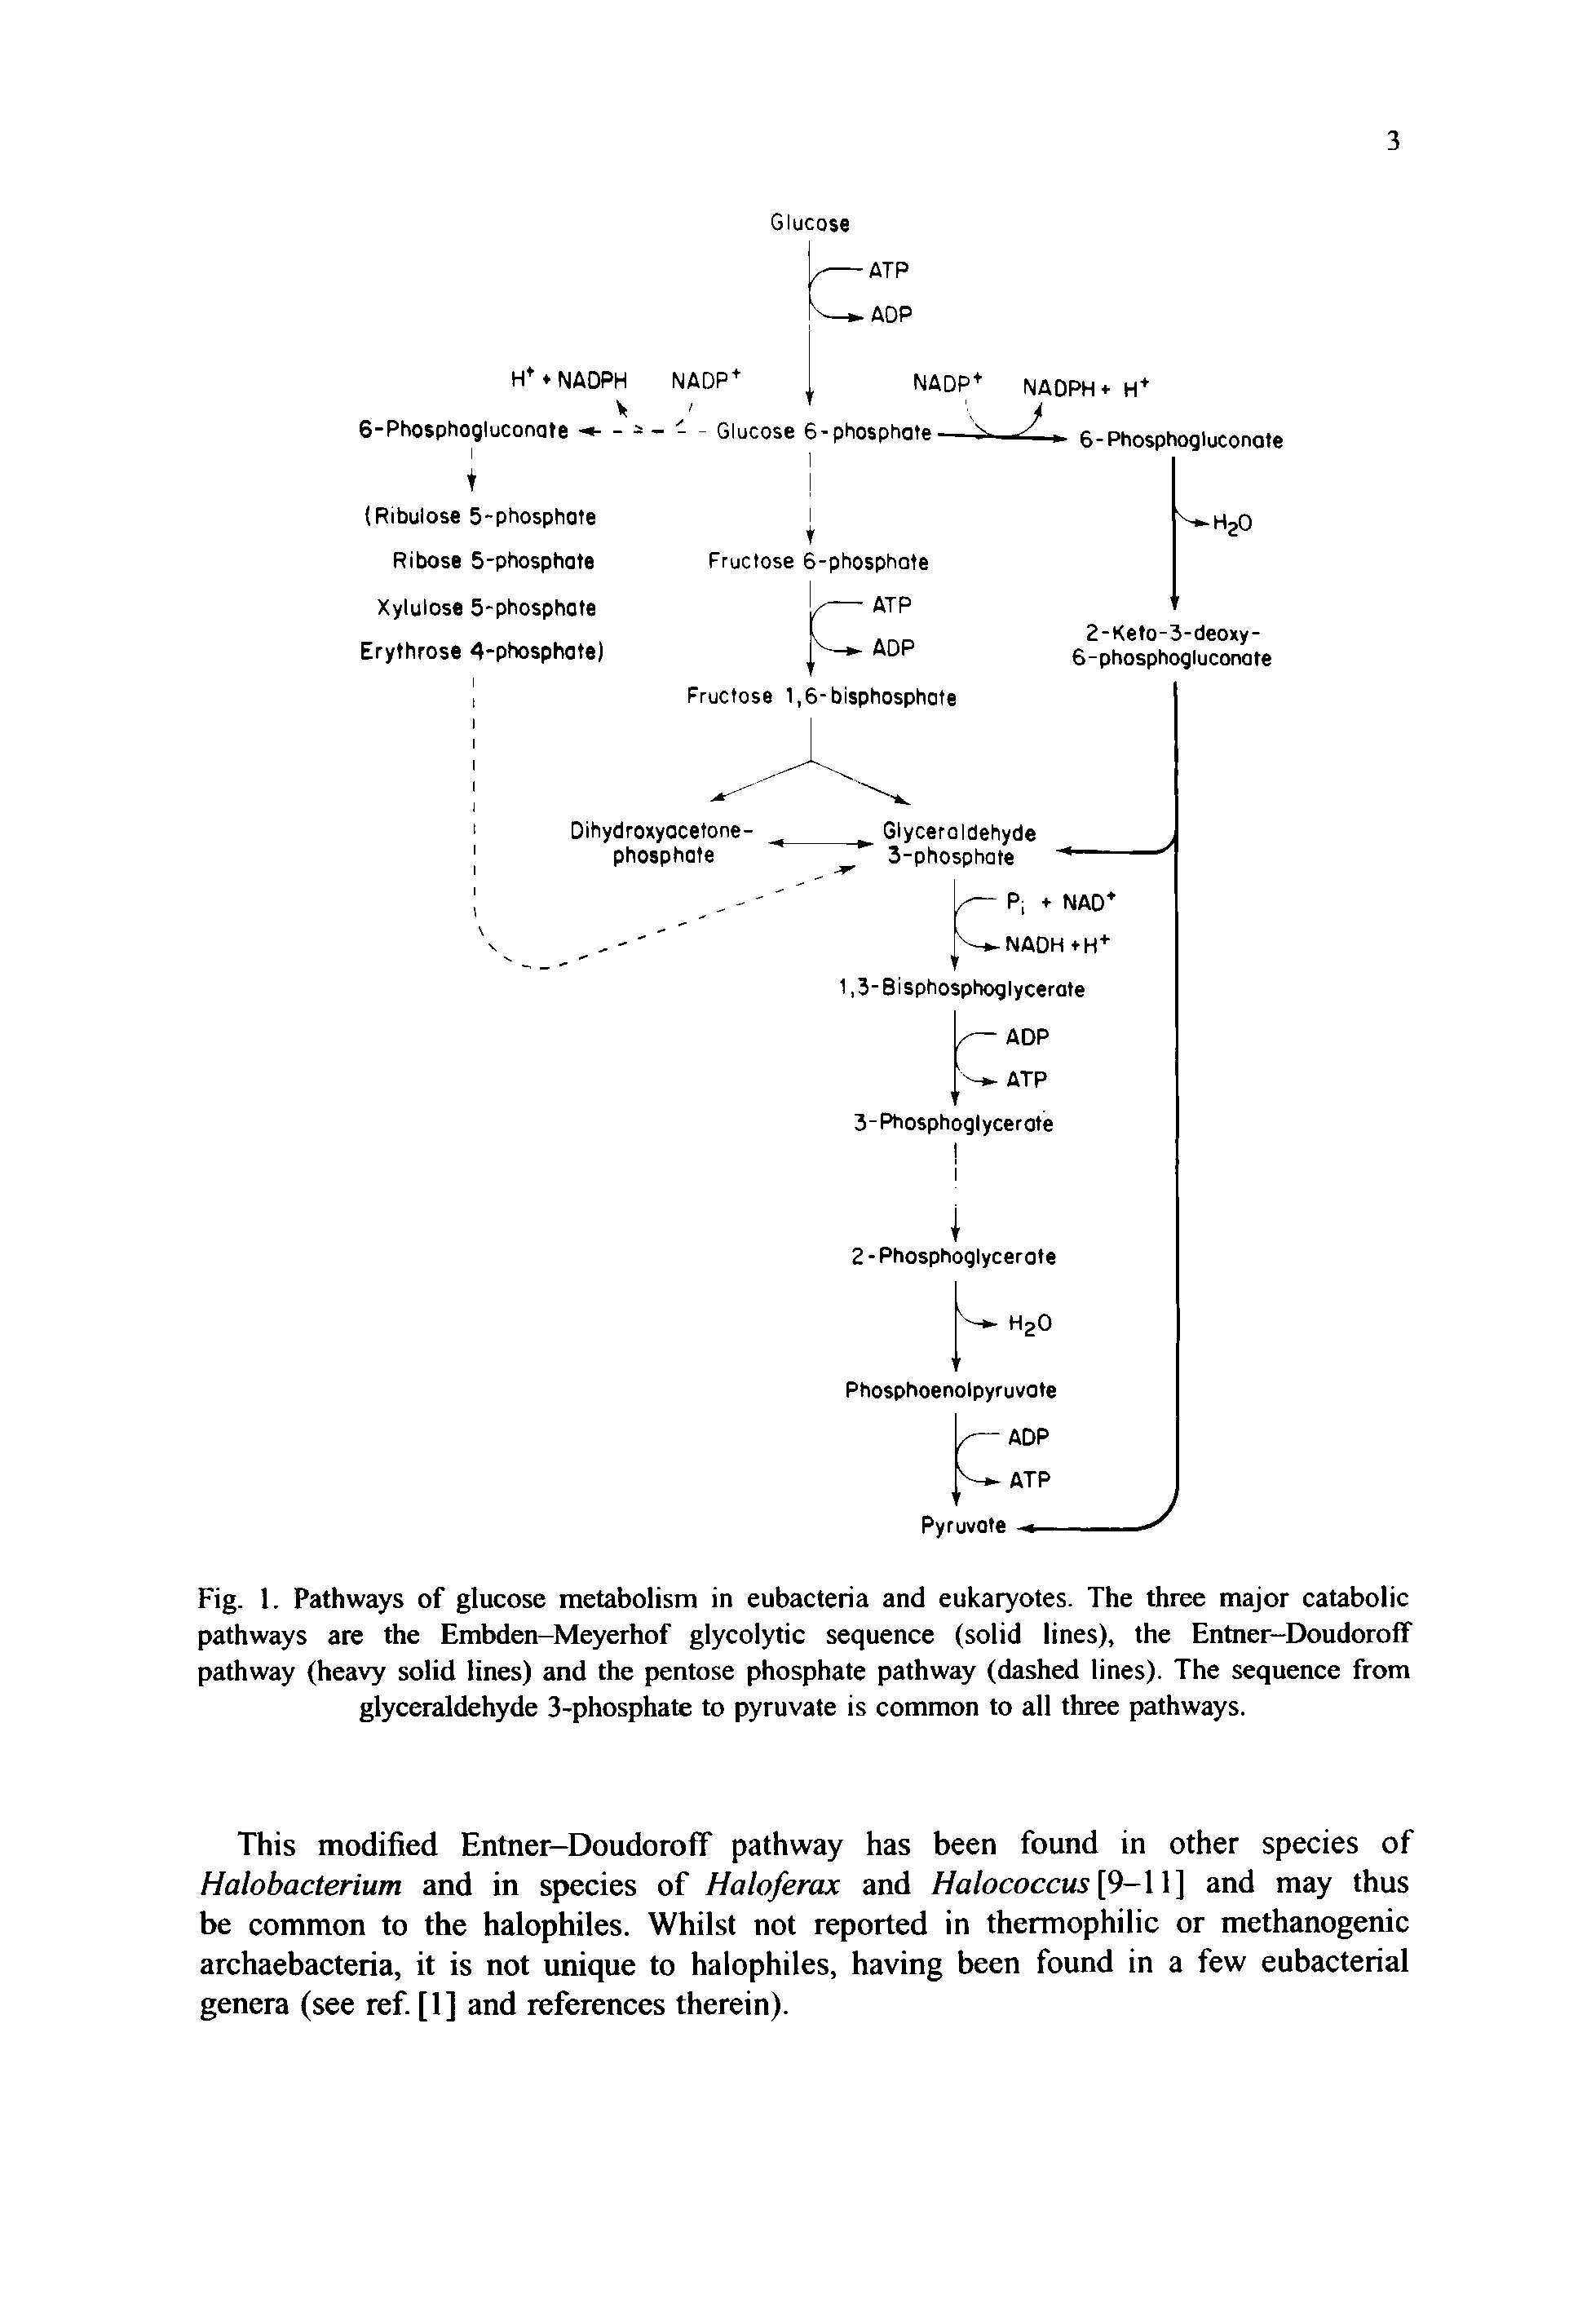 Fig. 1. Pathways of glucose metabolism in eubacteria and eukaryotes. The three major catabolic pathways are the Embden-Meyerhof glycolytic sequence (solid lines), the Entner-Doudoroff pathway (heavy solid lines) and the pentose phosphate pathway (dashed lines). The sequence from glyceraldehyde 3-phosphate to pyruvate is common to all three pathways.